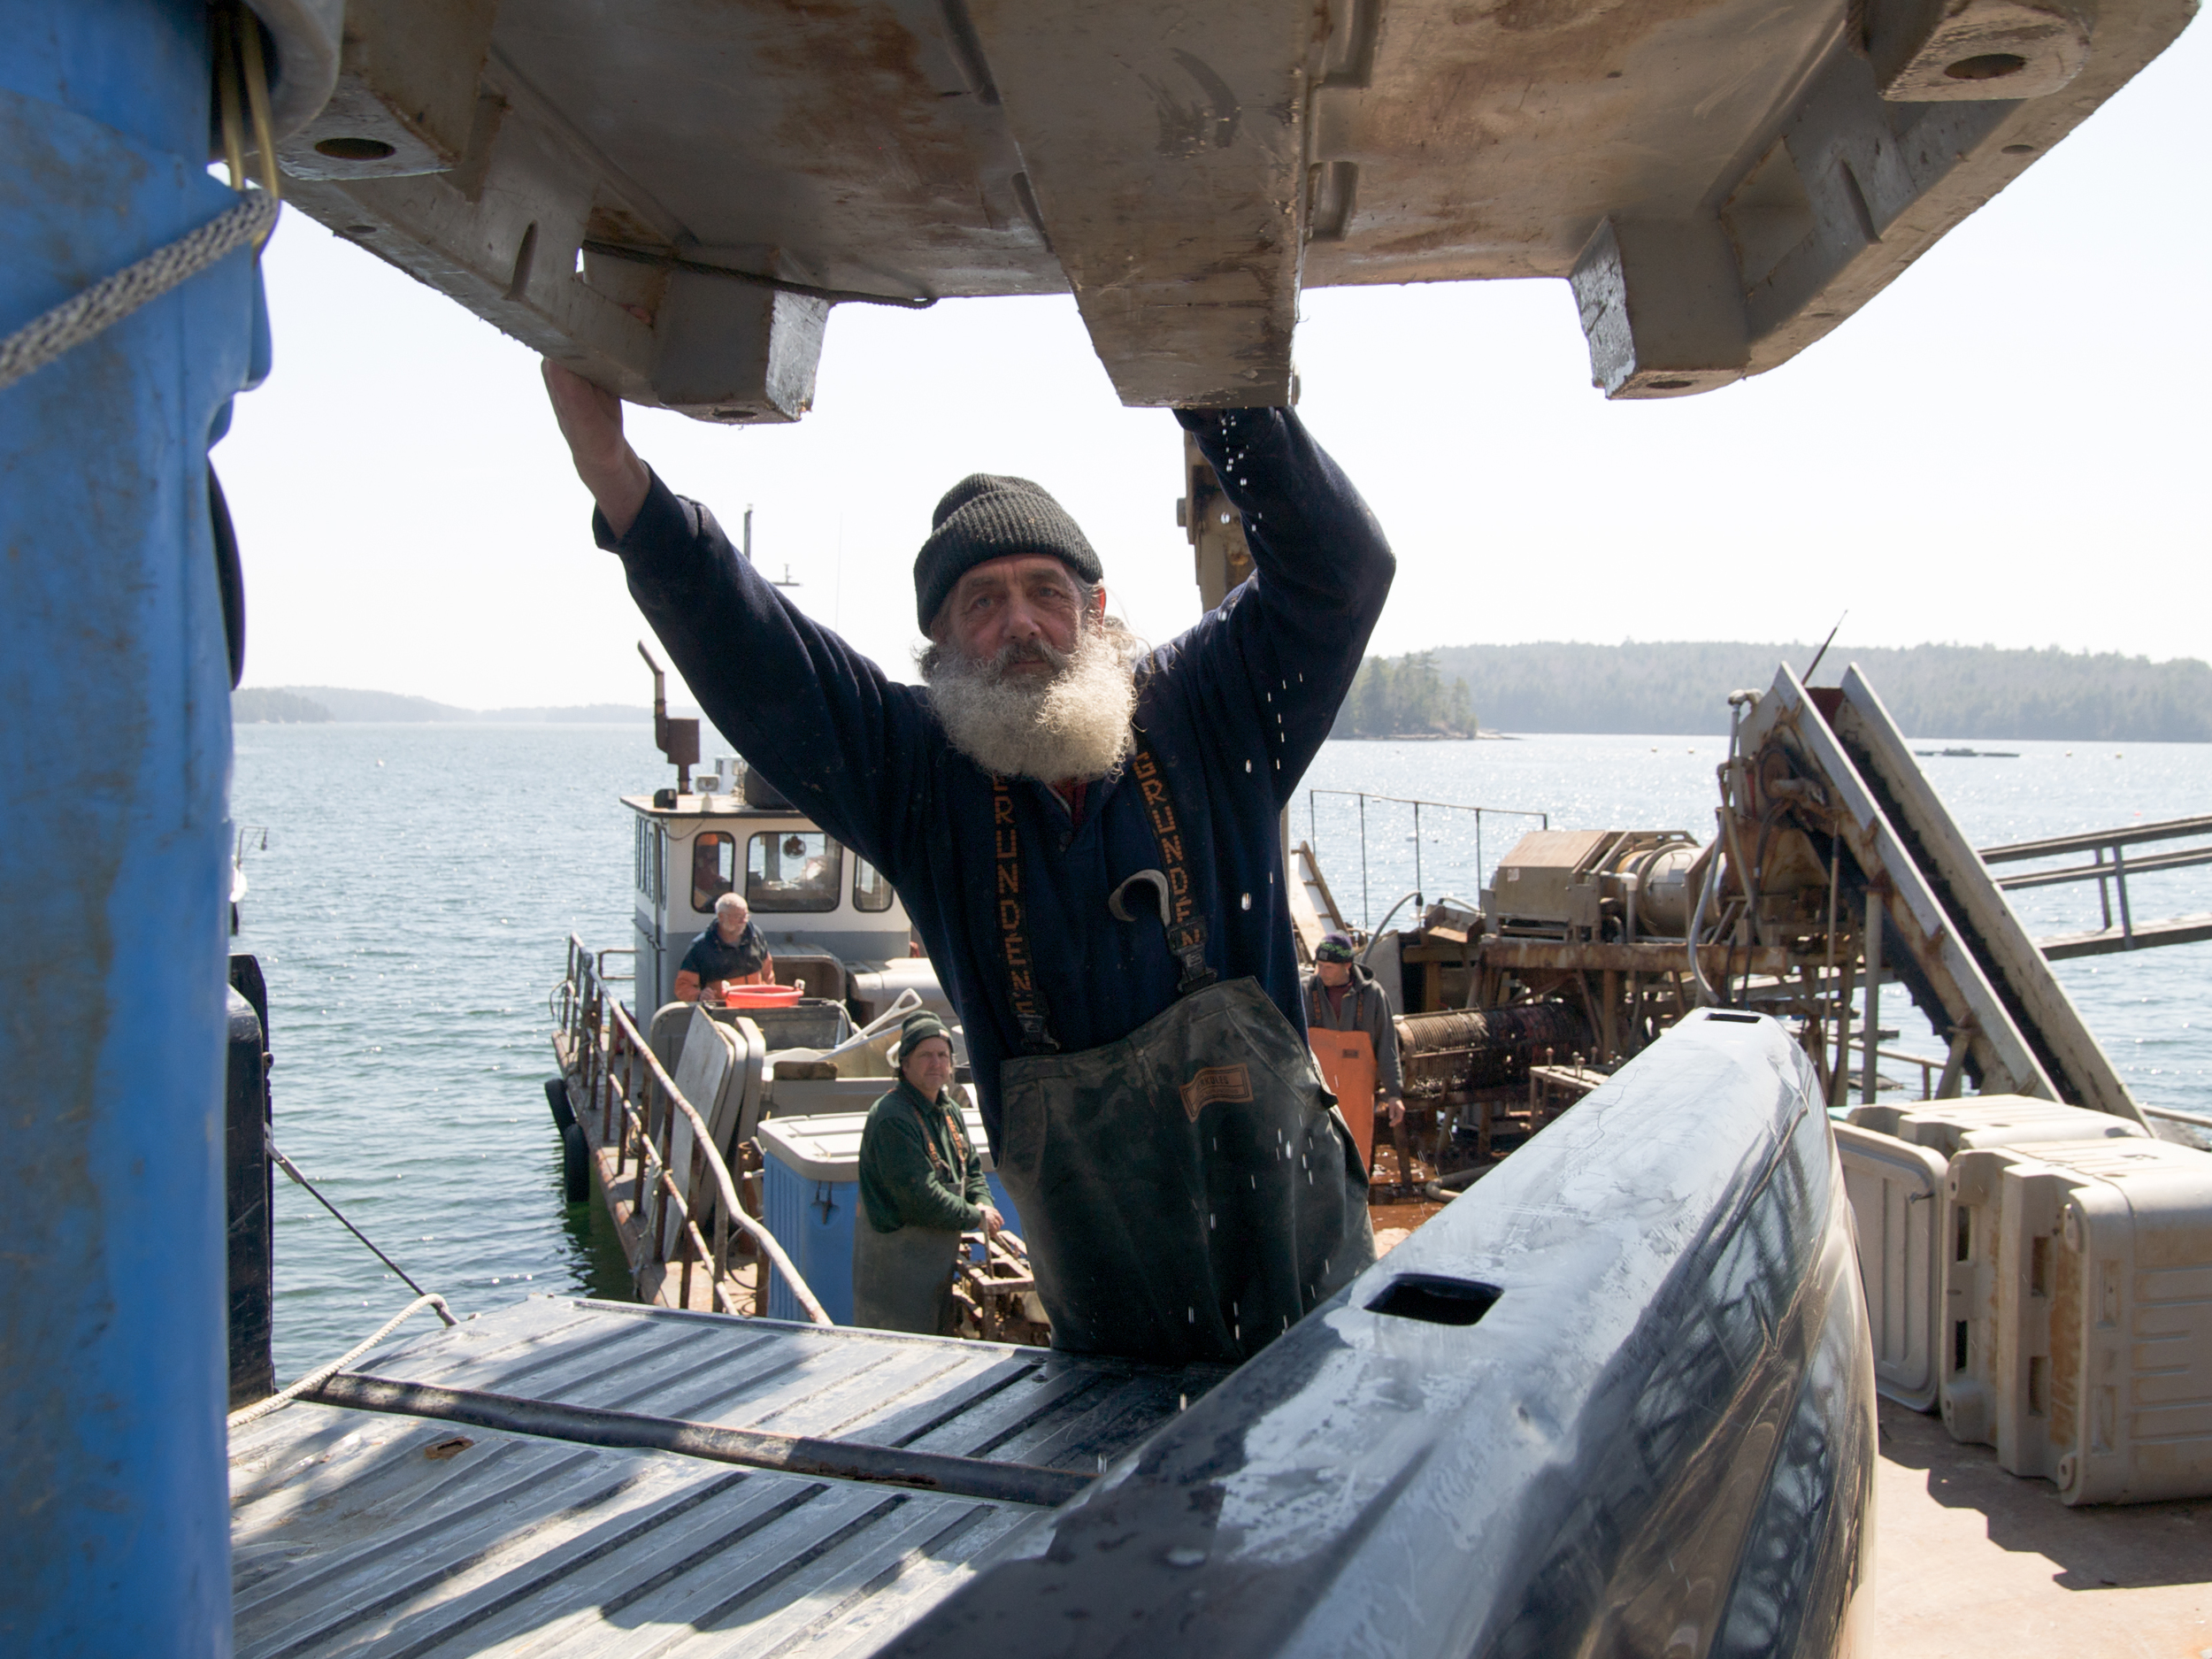  (04/25/09)&nbsp;Joe Larrabee guides one of the plastic totes filled with bags of mussels onto the back of a pickup truck. Once all the mussels are loaded onto the different trucks, the crew drive off to various restaurants and wholsalers to make the